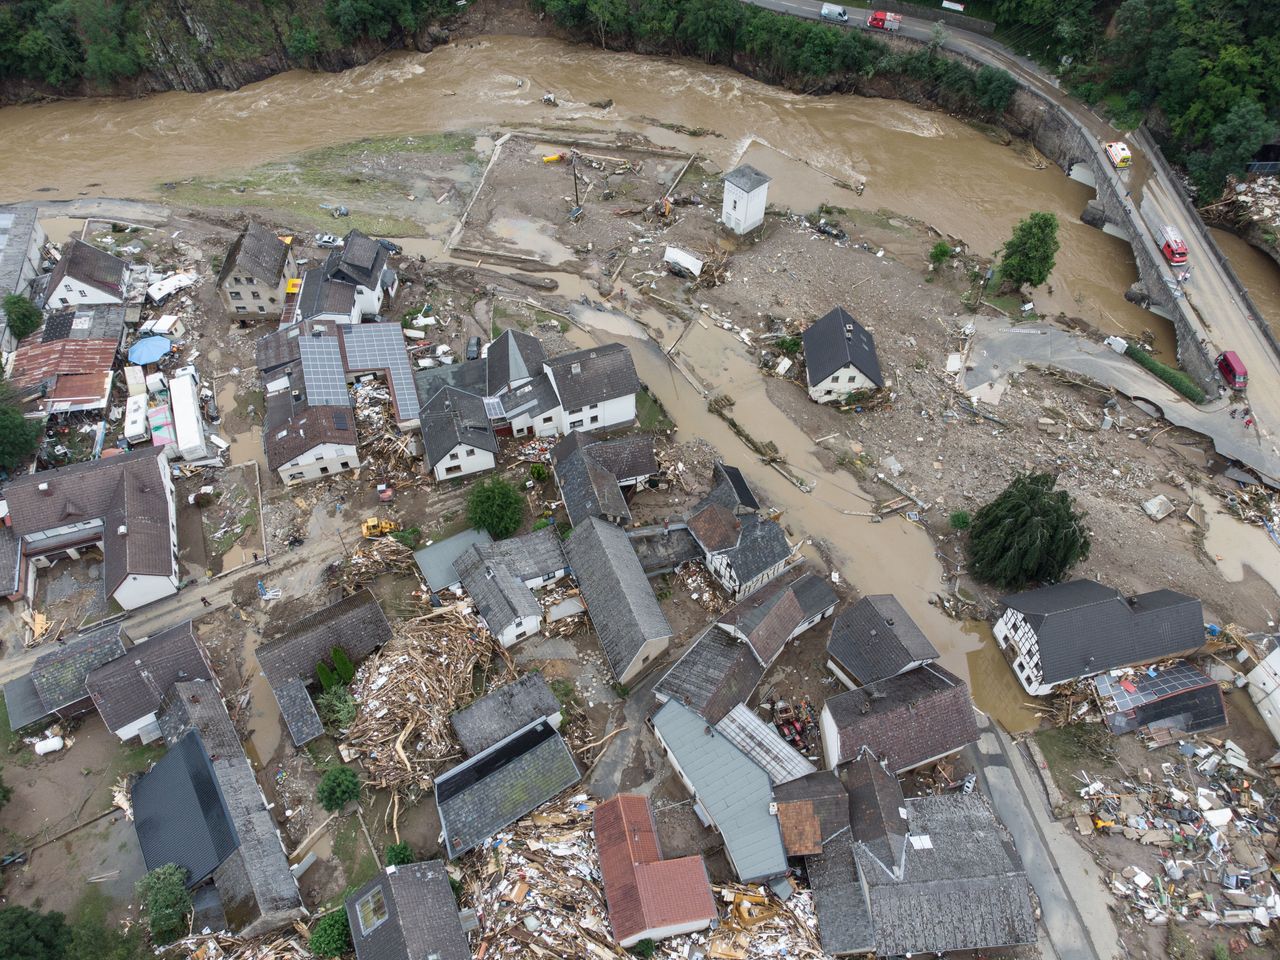 A village in the district of Ahrweiler is largely destroyed by flooding.